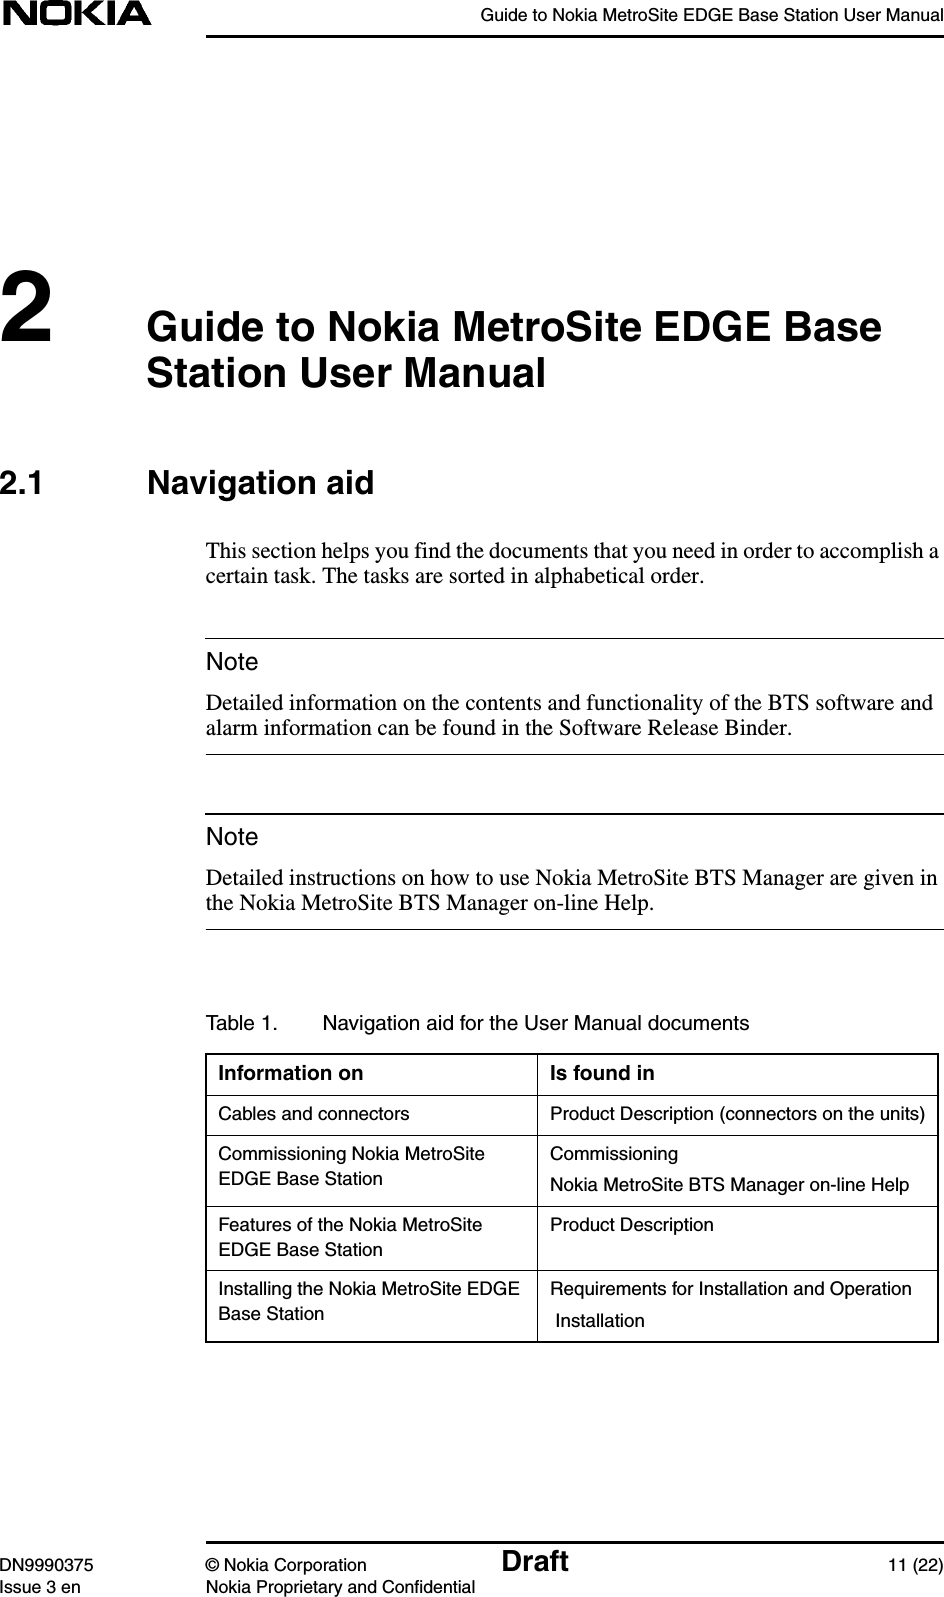 Guide to Nokia MetroSite EDGE Base Station User ManualDN9990375 © Nokia Corporation Draft 11 (22)Issue 3 en Nokia Proprietary and ConfidentialNoteNote2Guide to Nokia MetroSite EDGE BaseStation User Manual2.1 Navigation aidThis section helps you find the documents that you need in order to accomplish acertain task. The tasks are sorted in alphabetical order.Detailed information on the contents and functionality of the BTS software andalarm information can be found in the Software Release Binder.Detailed instructions on how to use Nokia MetroSite BTS Manager are given inthe Nokia MetroSite BTS Manager on-line Help.Table 1. Navigation aid for the User Manual documentsInformation on Is found inCables and connectors Product Description (connectors on the units)Commissioning Nokia MetroSiteEDGE Base StationCommissioningNokia MetroSite BTS Manager on-line HelpFeatures of the Nokia MetroSiteEDGE Base StationProduct DescriptionInstalling the Nokia MetroSite EDGEBase StationRequirements for Installation and Operation Installation